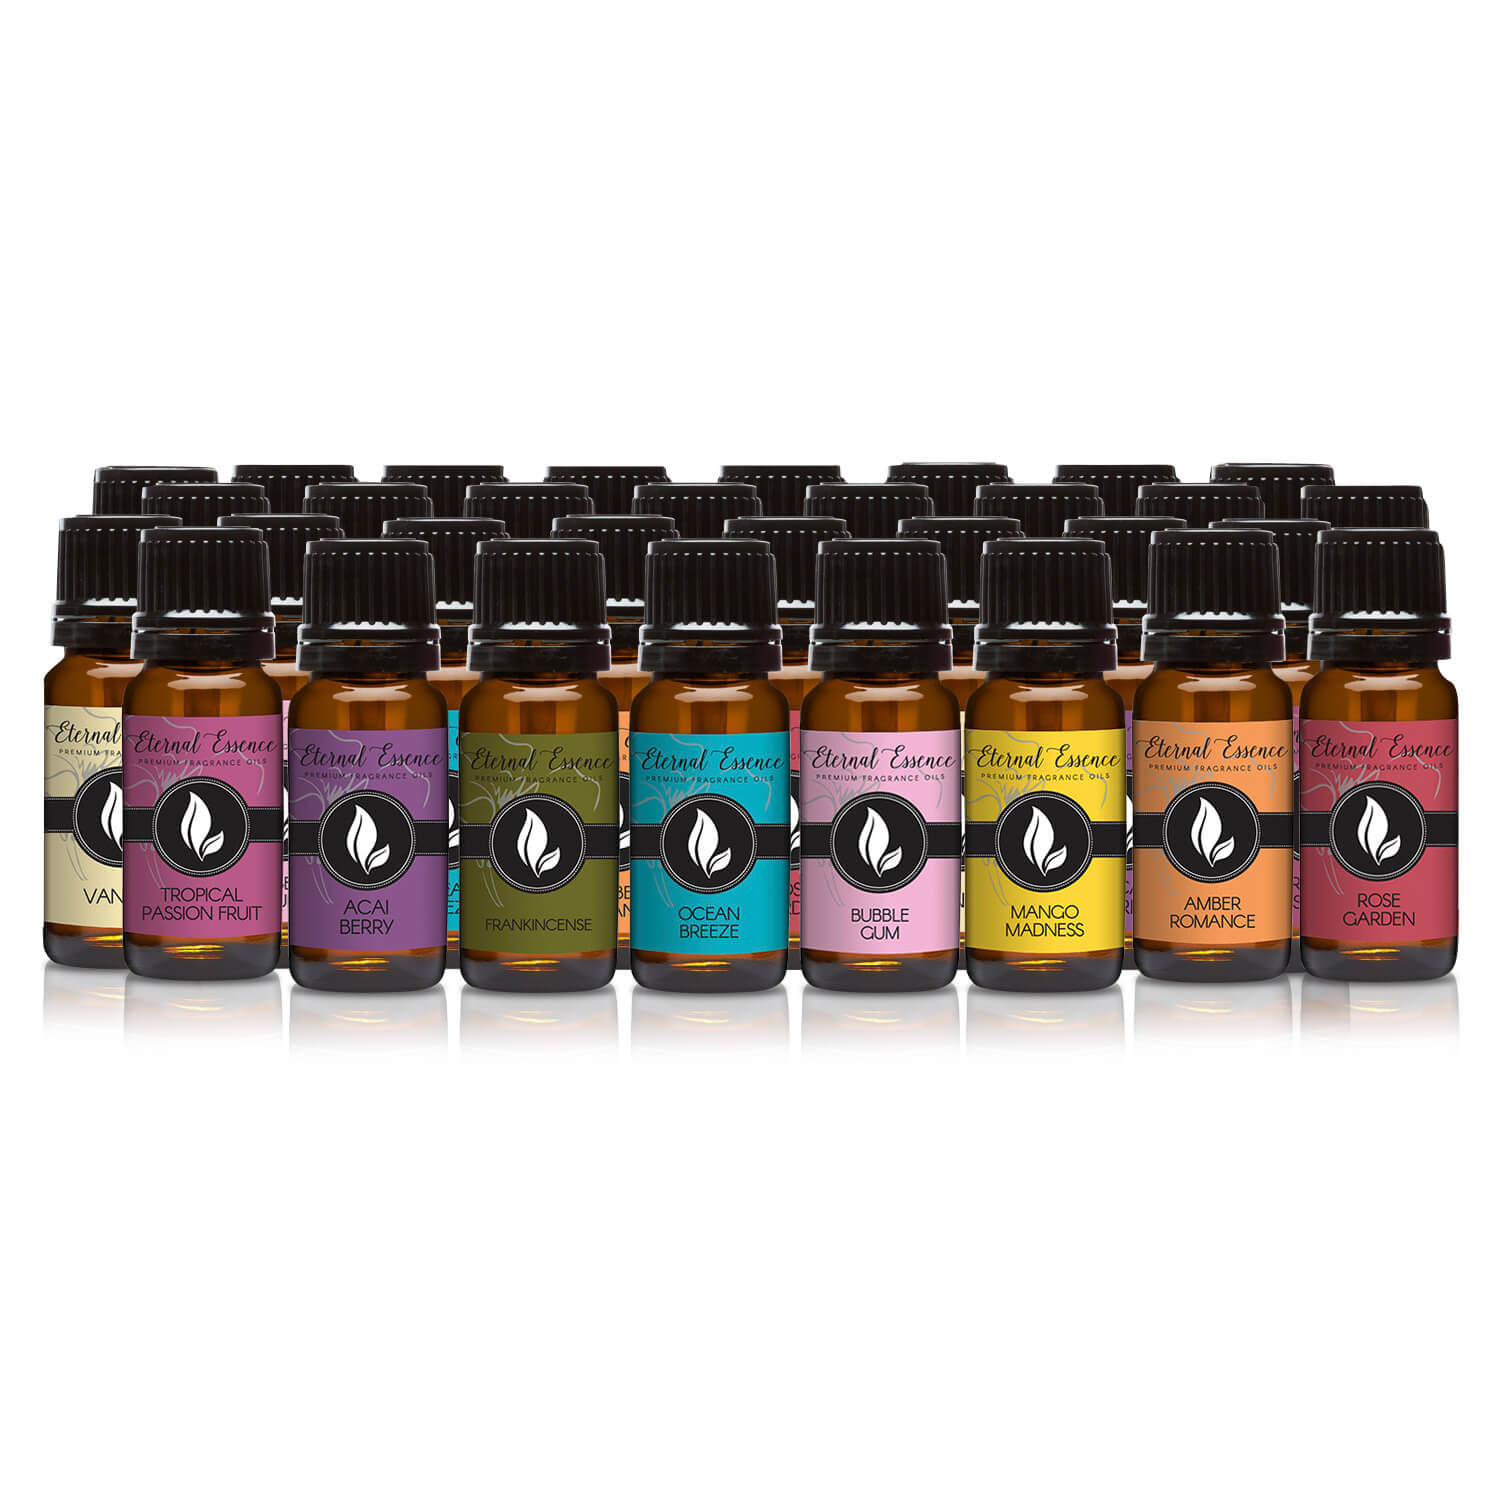 Fragrance Oil - Complete Essence of Fragrance - 30/10 Ml - Scented Oil by Eternal Essence Oils